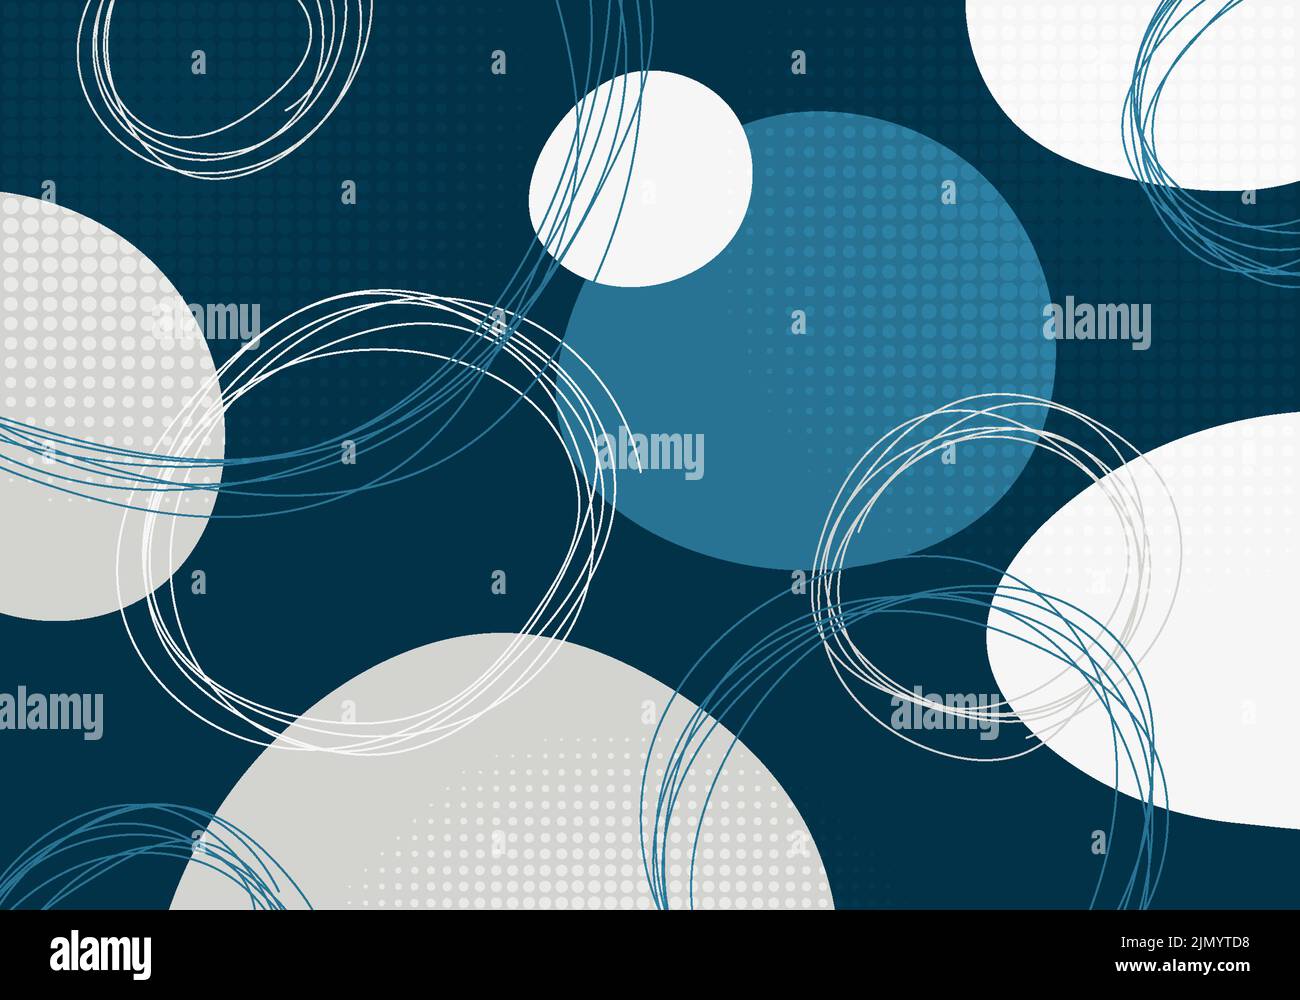 Abstract blue and white harmony circle style with dots halftone pattern. Overlapping artwork with hand drawing background. Vector Stock Vector